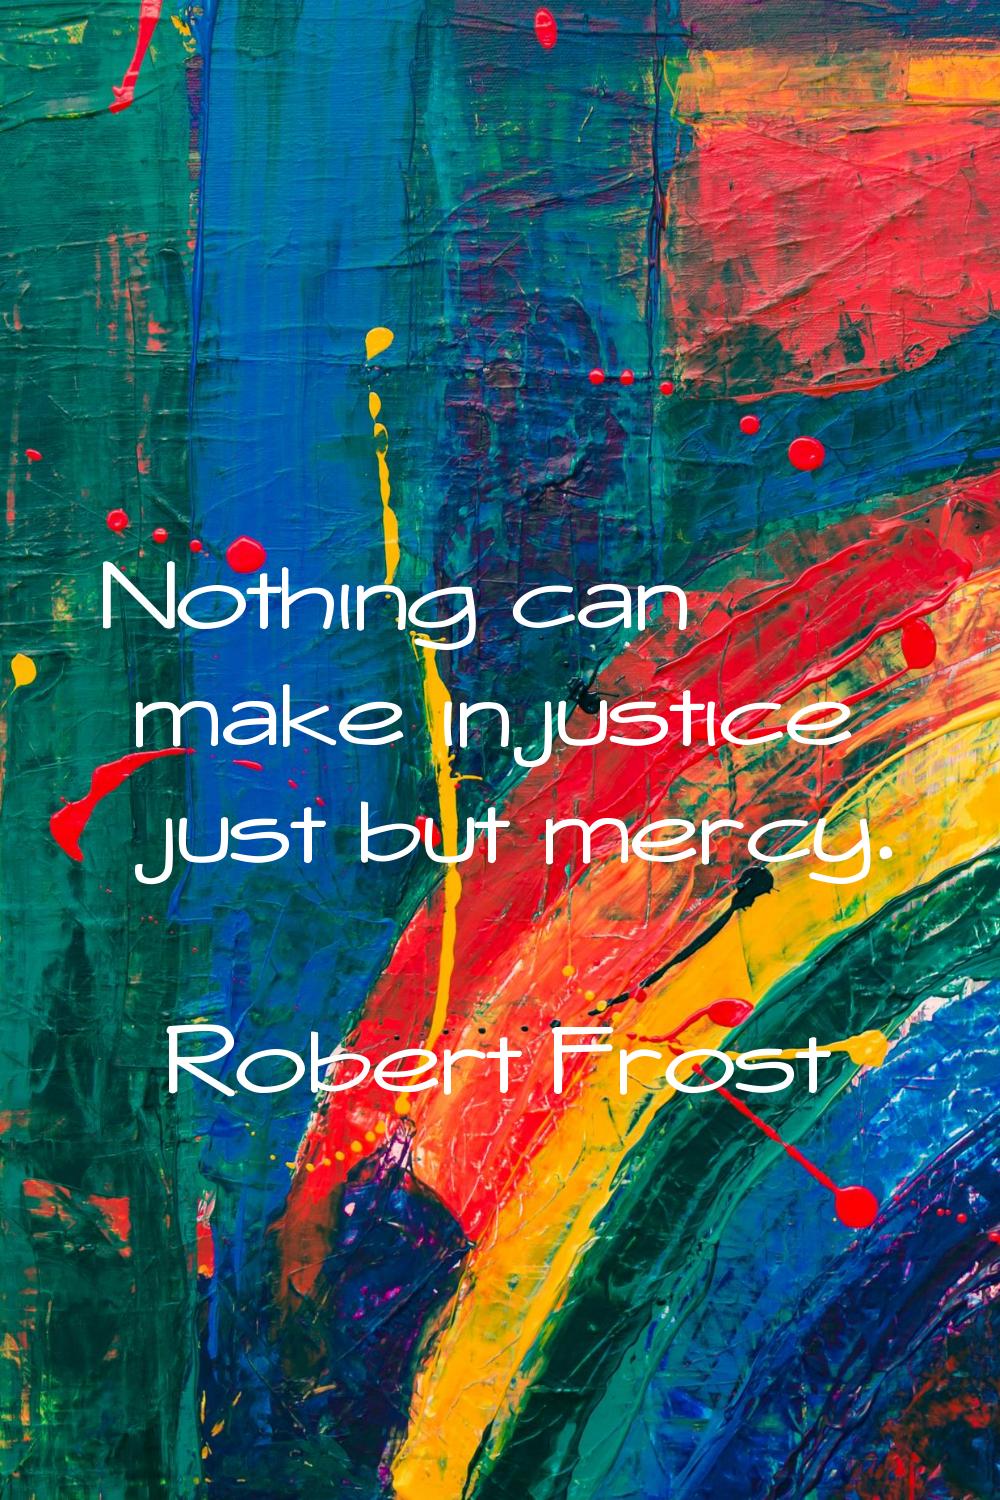 Nothing can make injustice just but mercy.